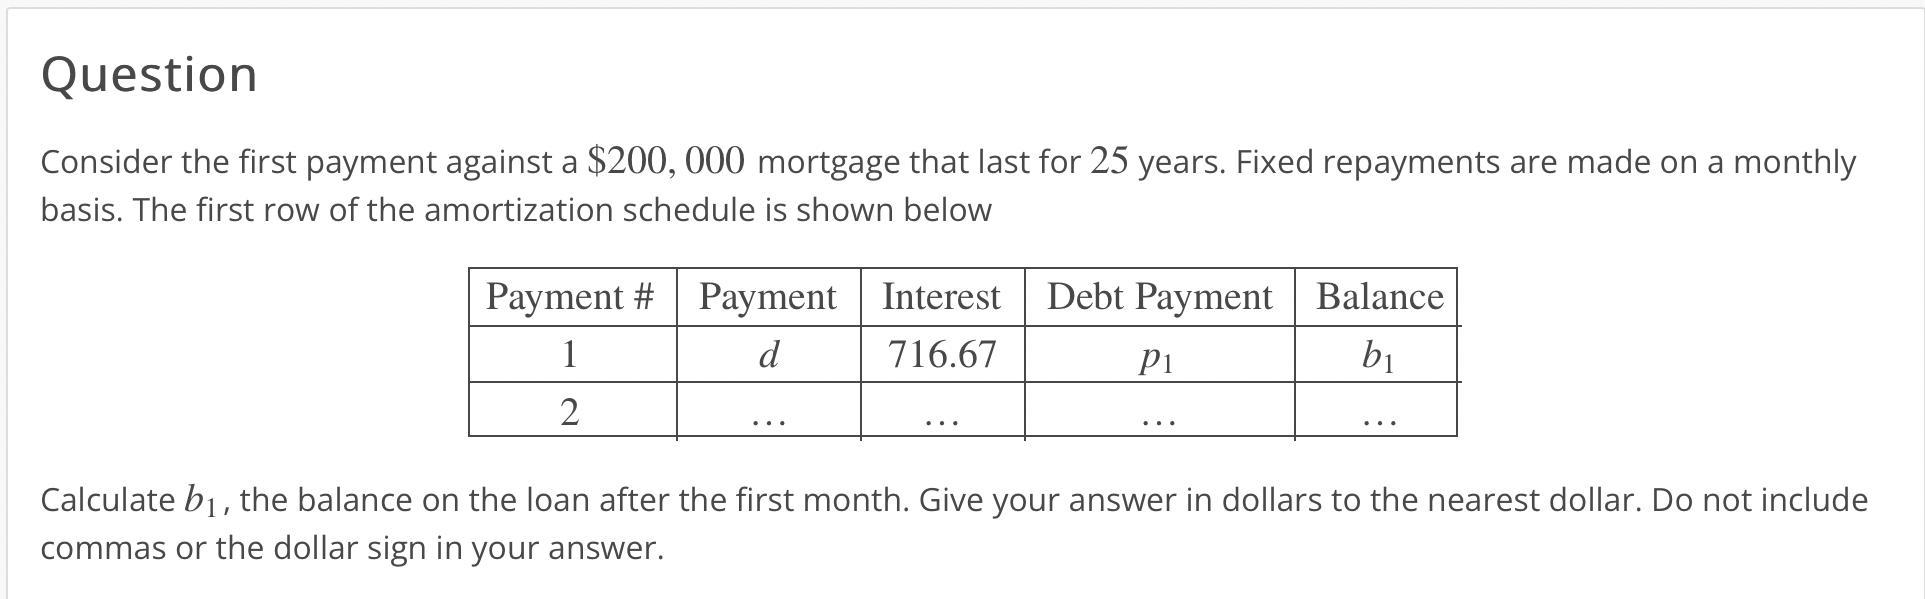 Calculate B1, The Balance On The Loan After The First Month. Give Your Answer In Dollars To The Nearest